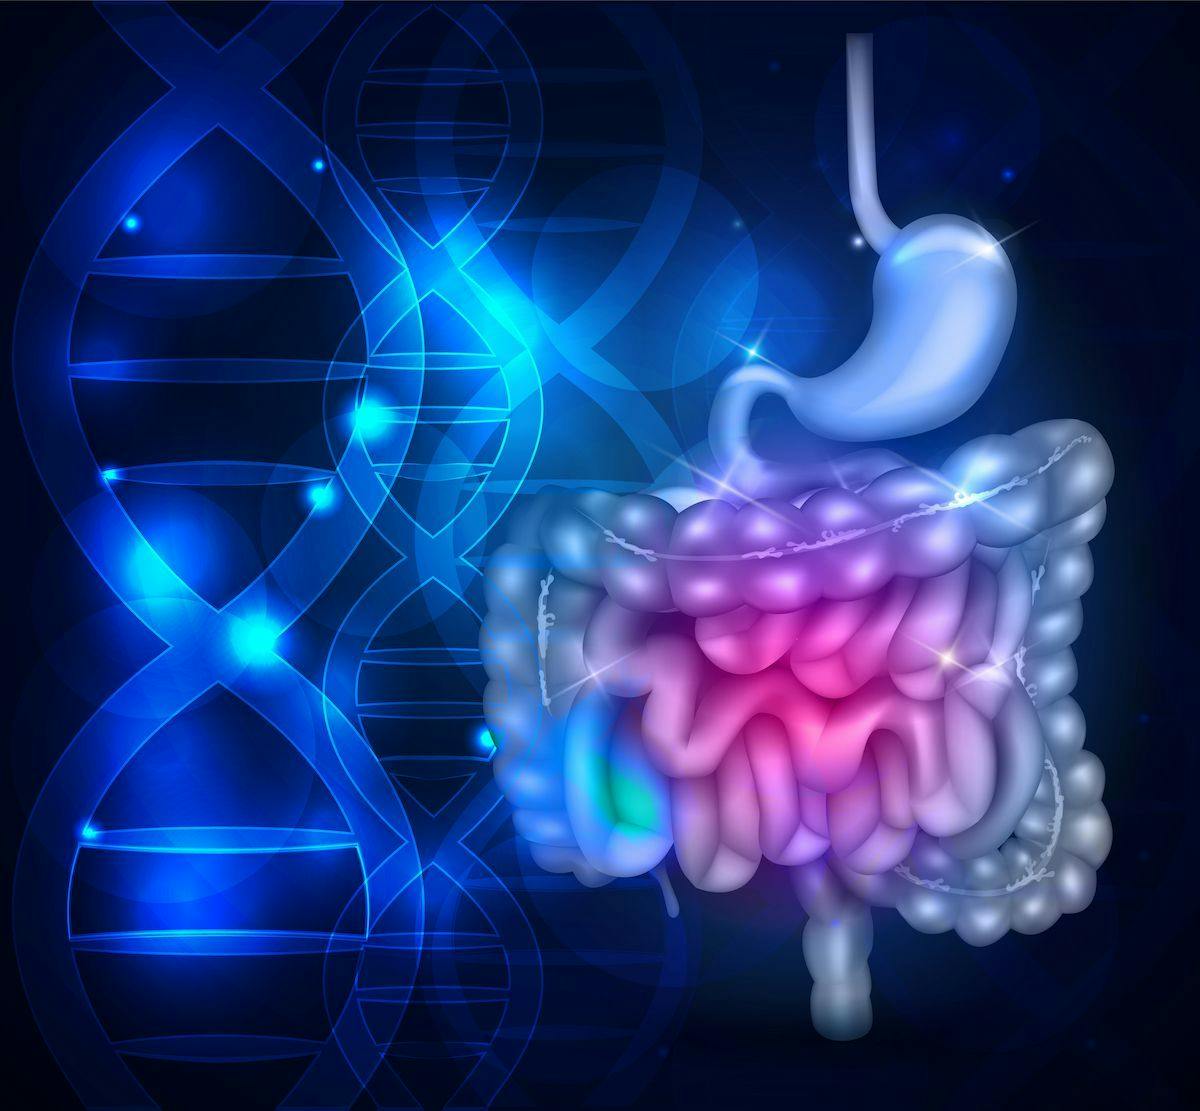 Long-term circulating tumor DNA responses appear to align with progression-free survival trends in a phase 2/3 trial of the GRANITE vaccine in those with microsatellite-stable colorectal cancer.